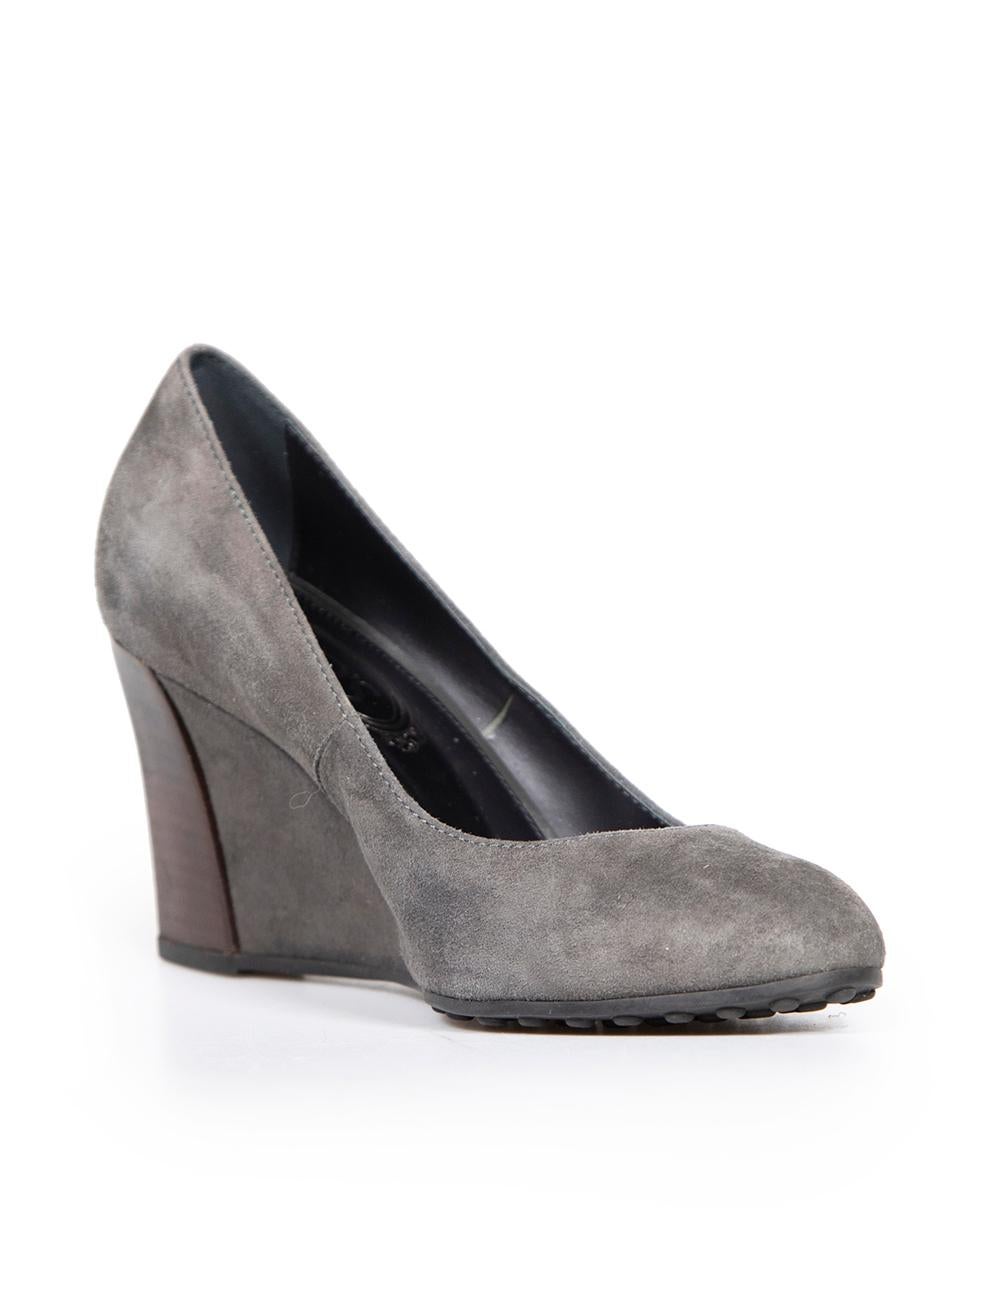 CONDITION is Very good. Hardly any visible wear to wedges is evident on this used Tod's designer resale item.
 
 
 
 Details
 
 
 Grey
 
 Suede
 
 Slip on wedges
 
 Almond toe
 
 Wedge high heel
 
 Wooden accent on heel
 
 
 
 
 
 Made in Italy
 
 
